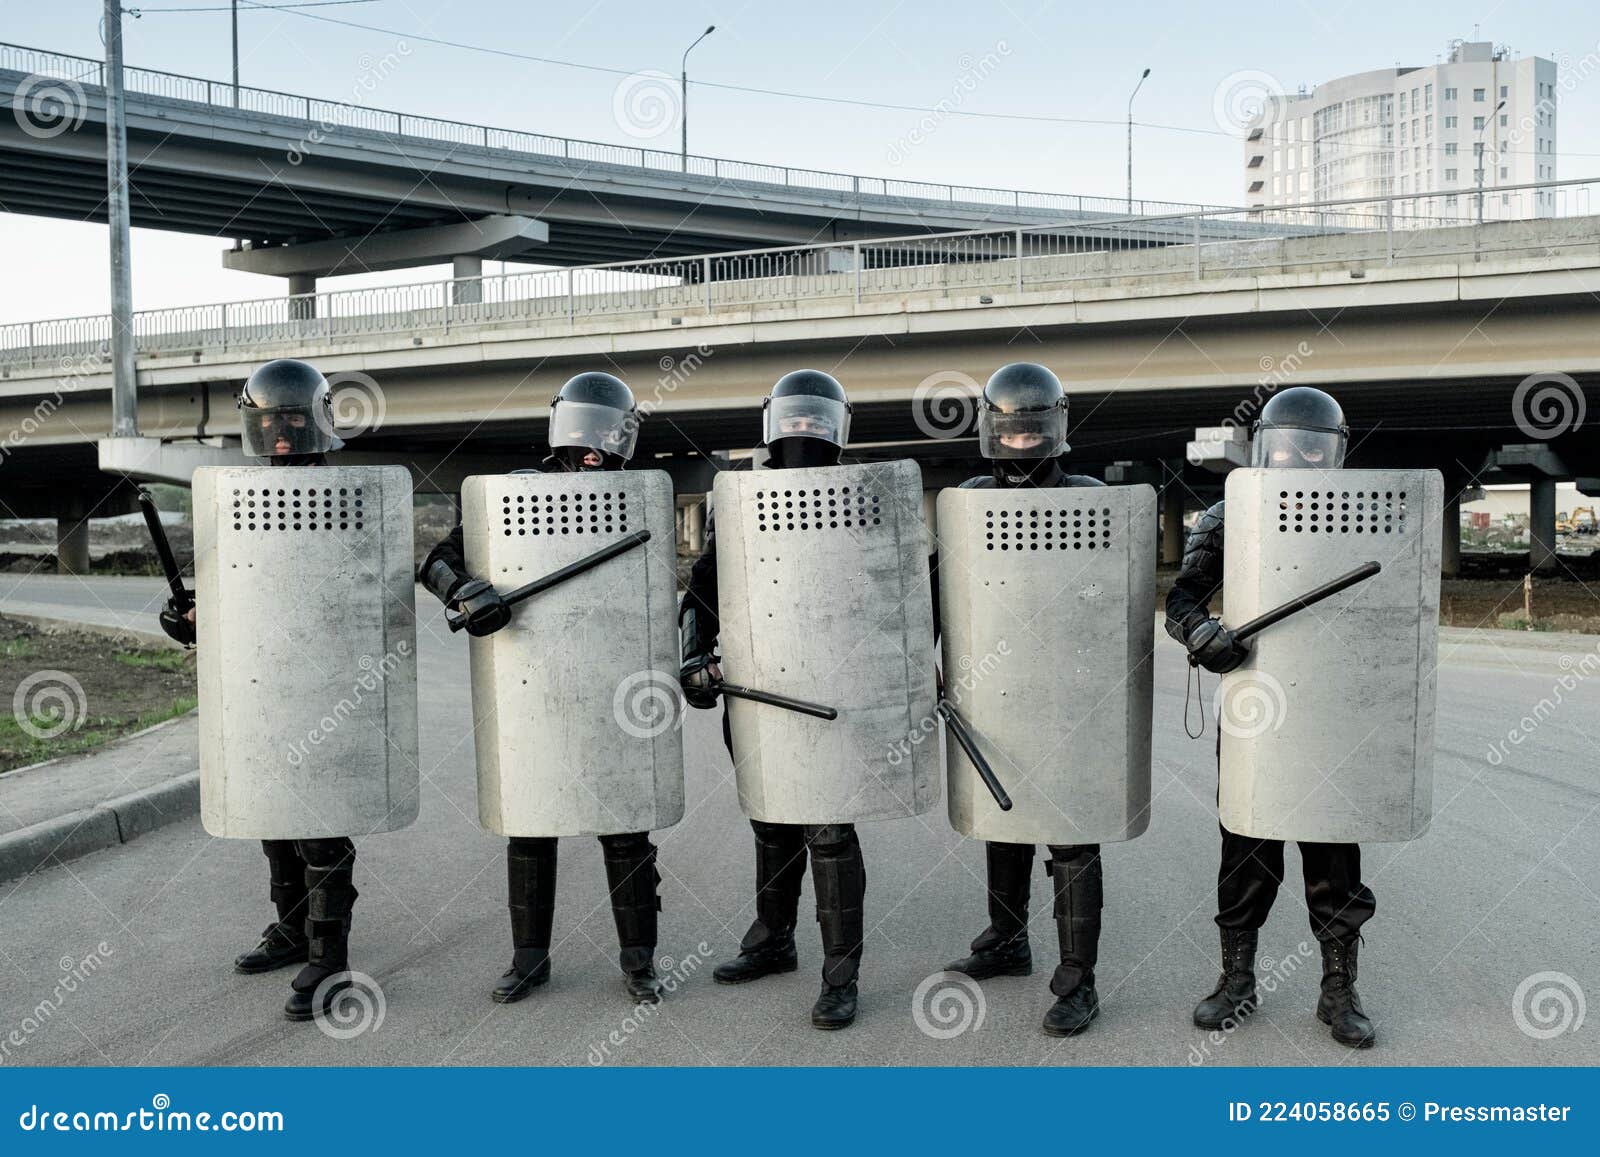 Guards Protected by Shields Stock Image - Image of outdoors, government ...